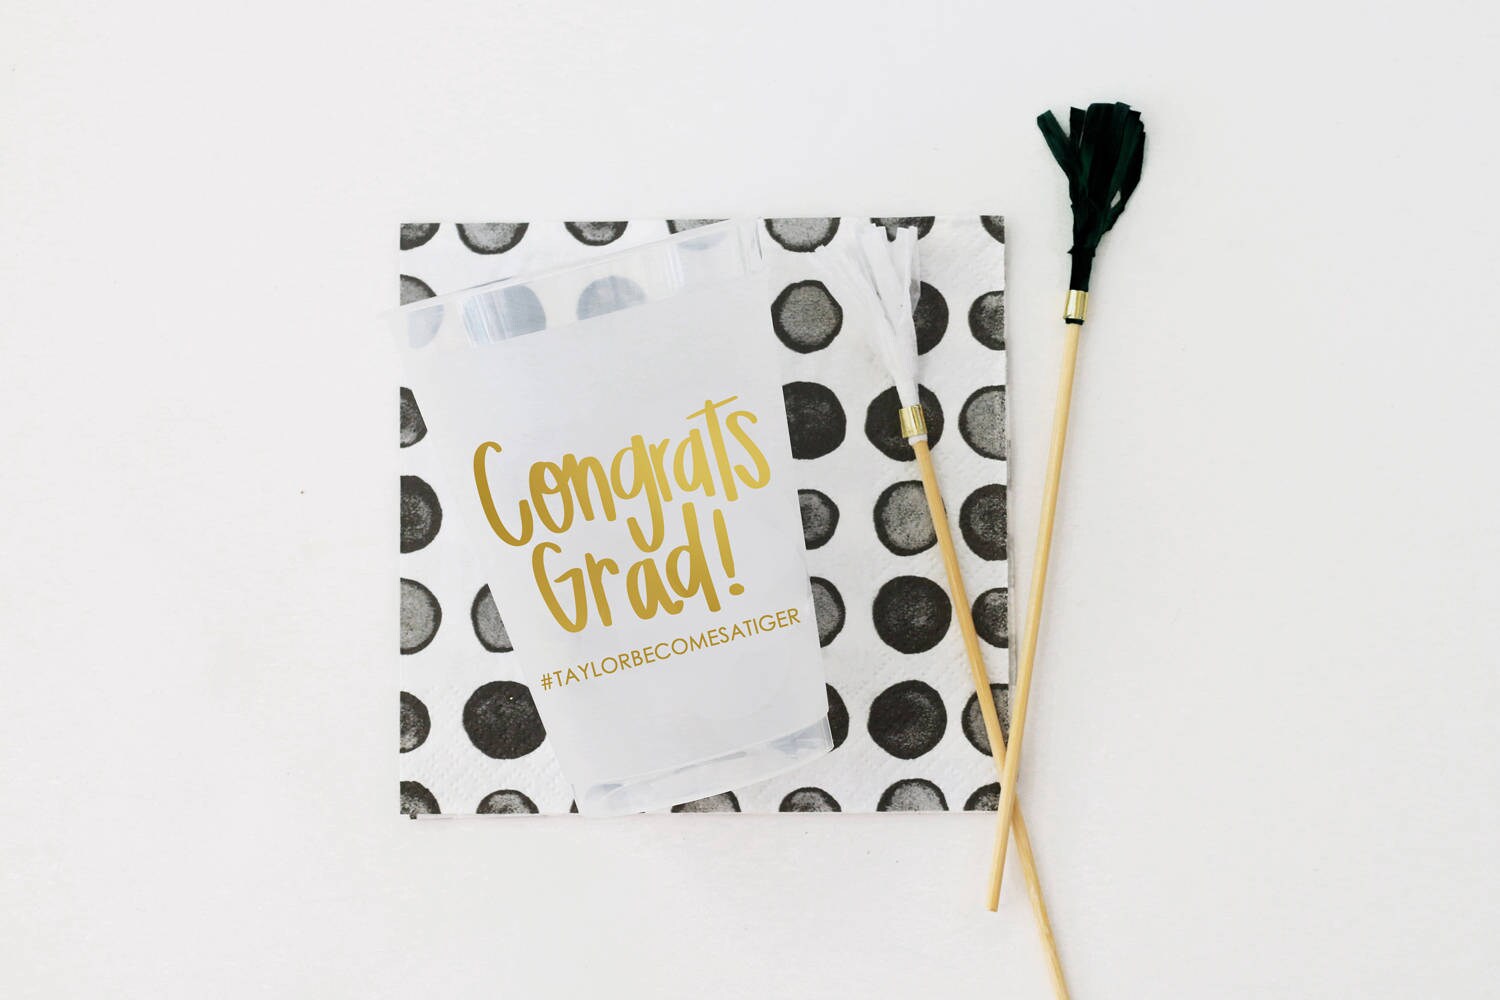 Kiss This Class Good-Bye Graduation Party Cups – Preppy Mama